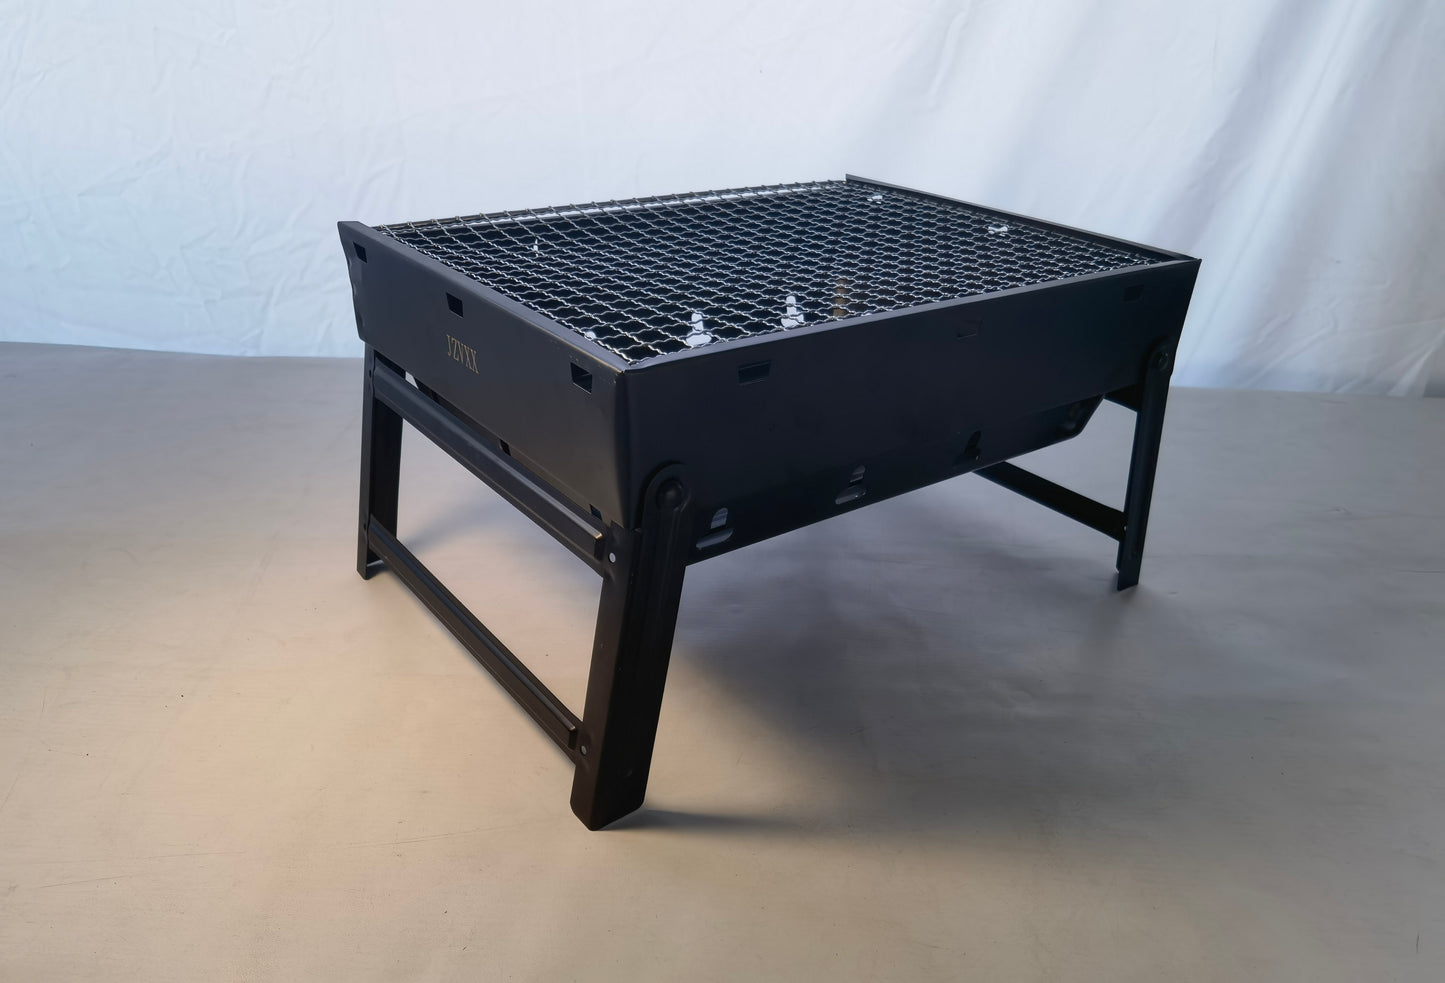 JZVXX outdoor use grill with leg